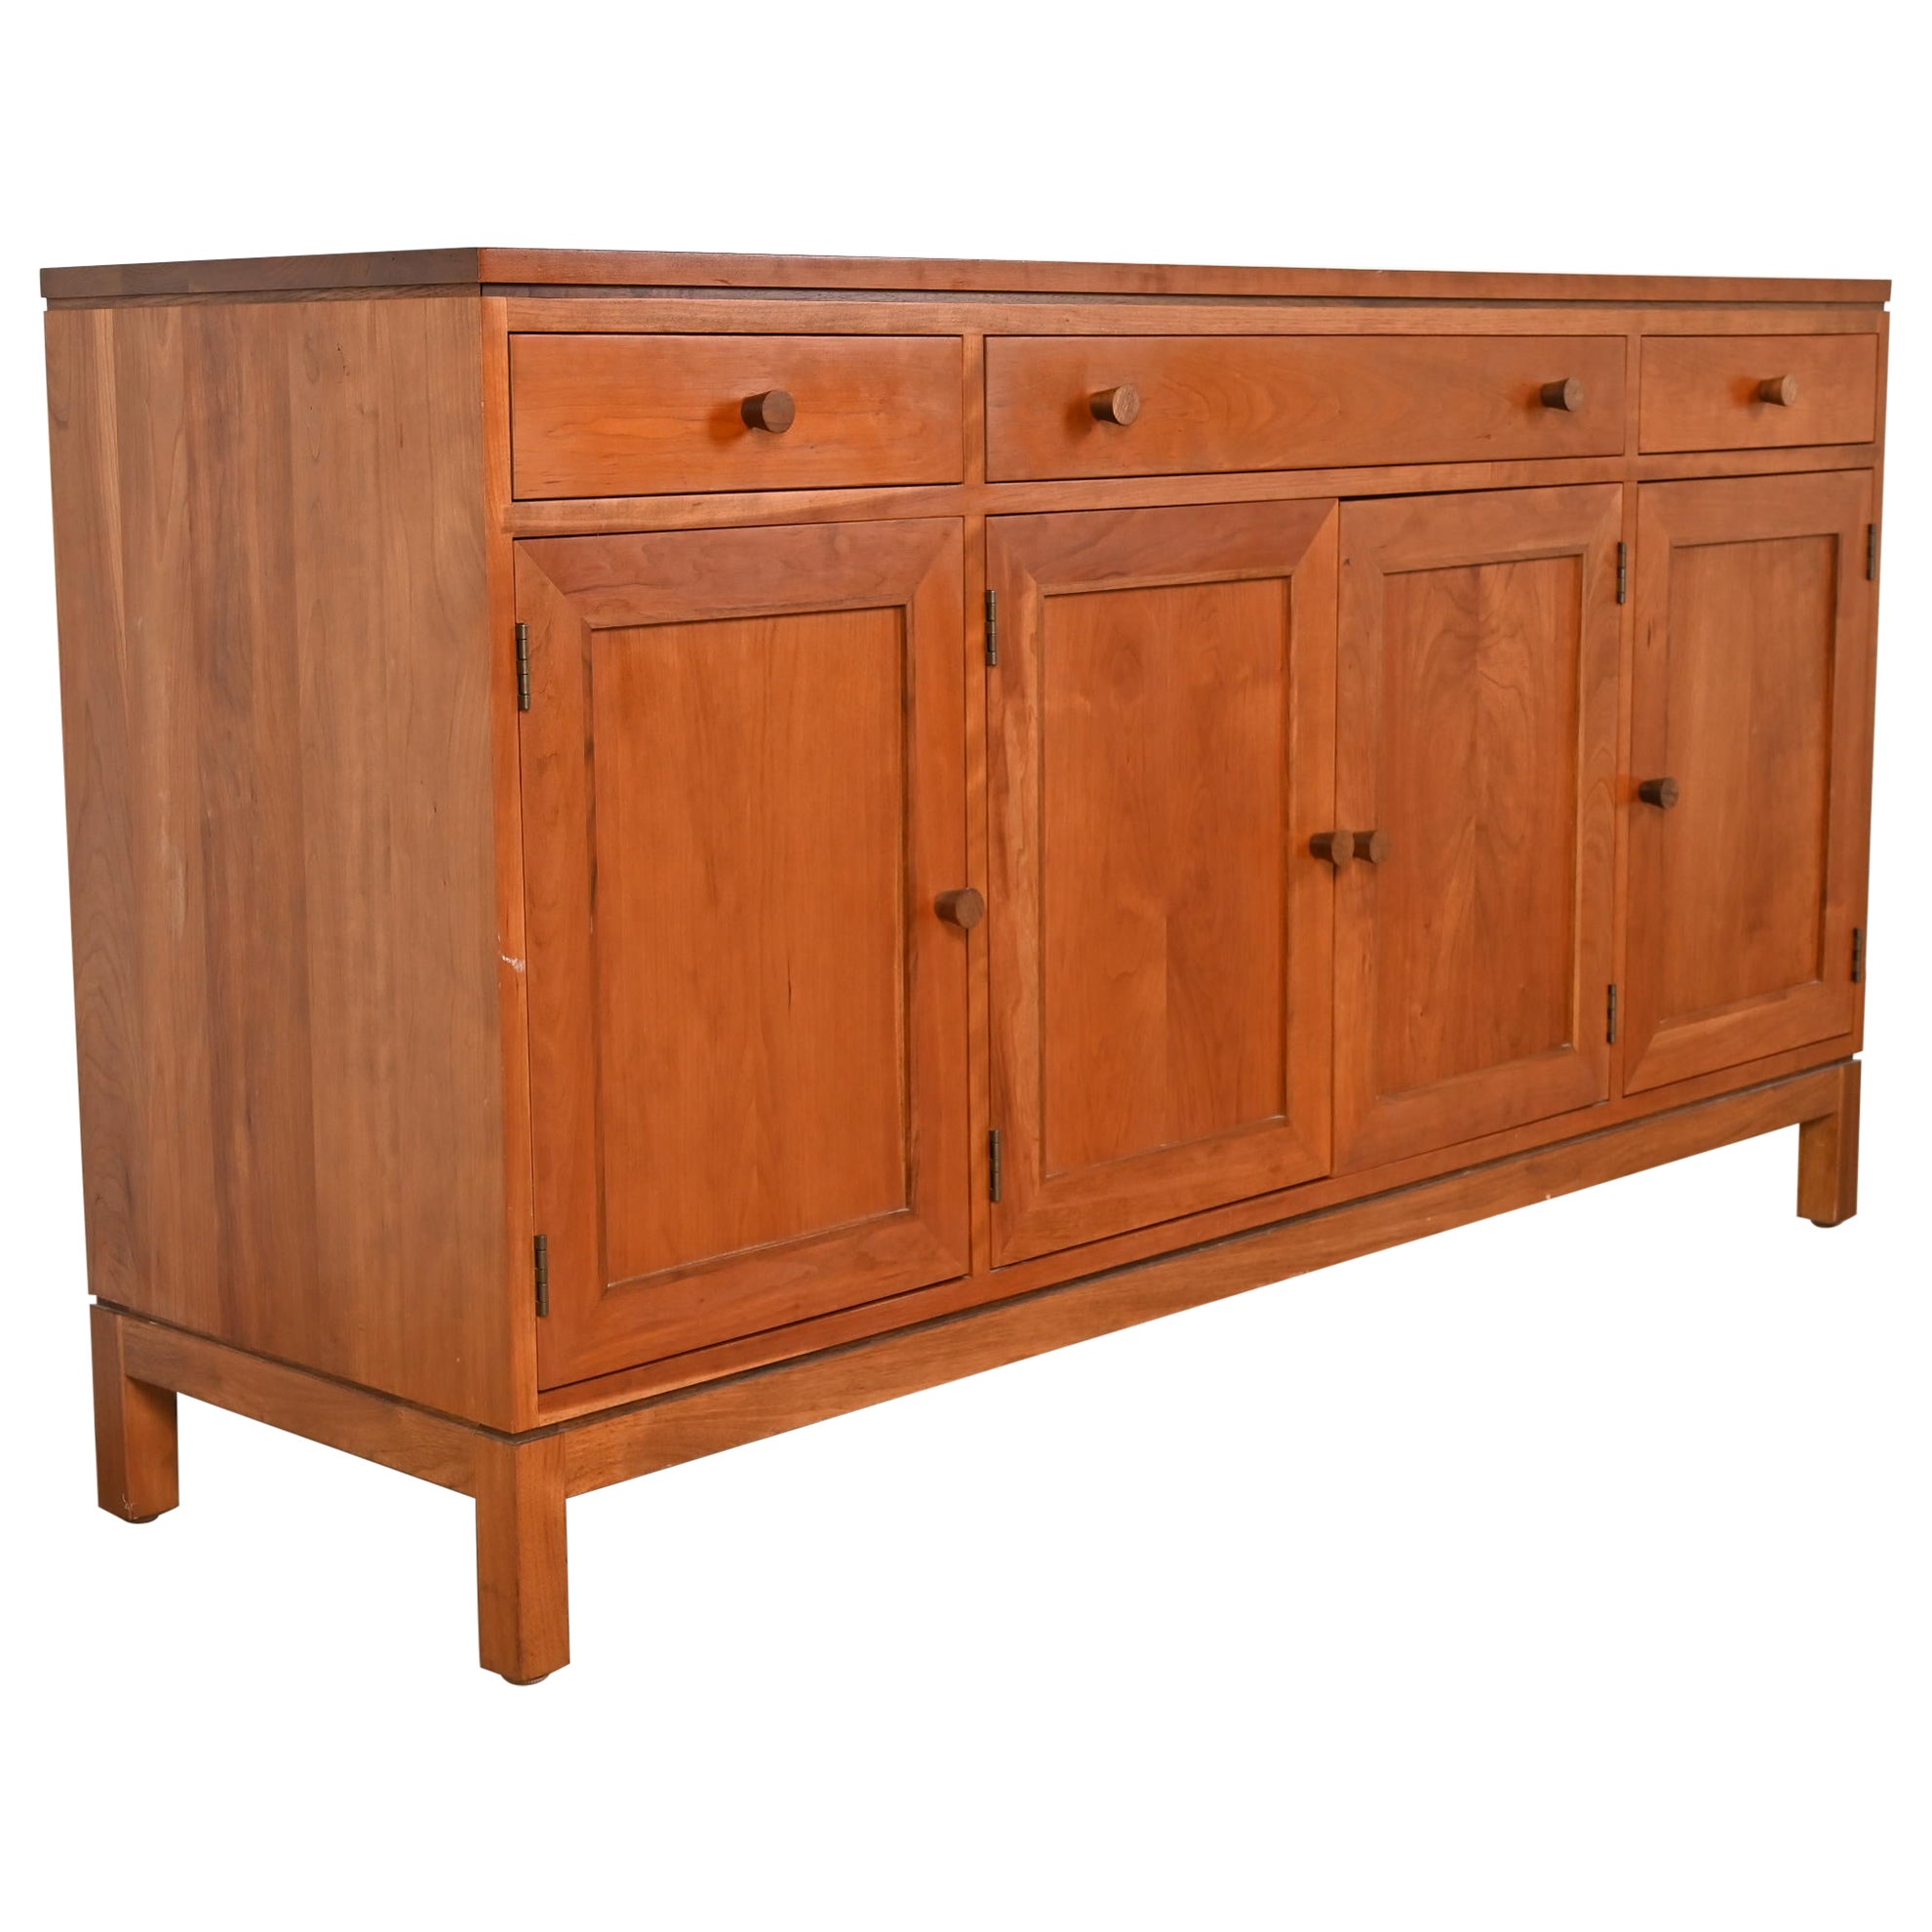 Stickley Arts & Crafts Shaker Cherry Wood Sideboard or Bar Cabinet For Sale